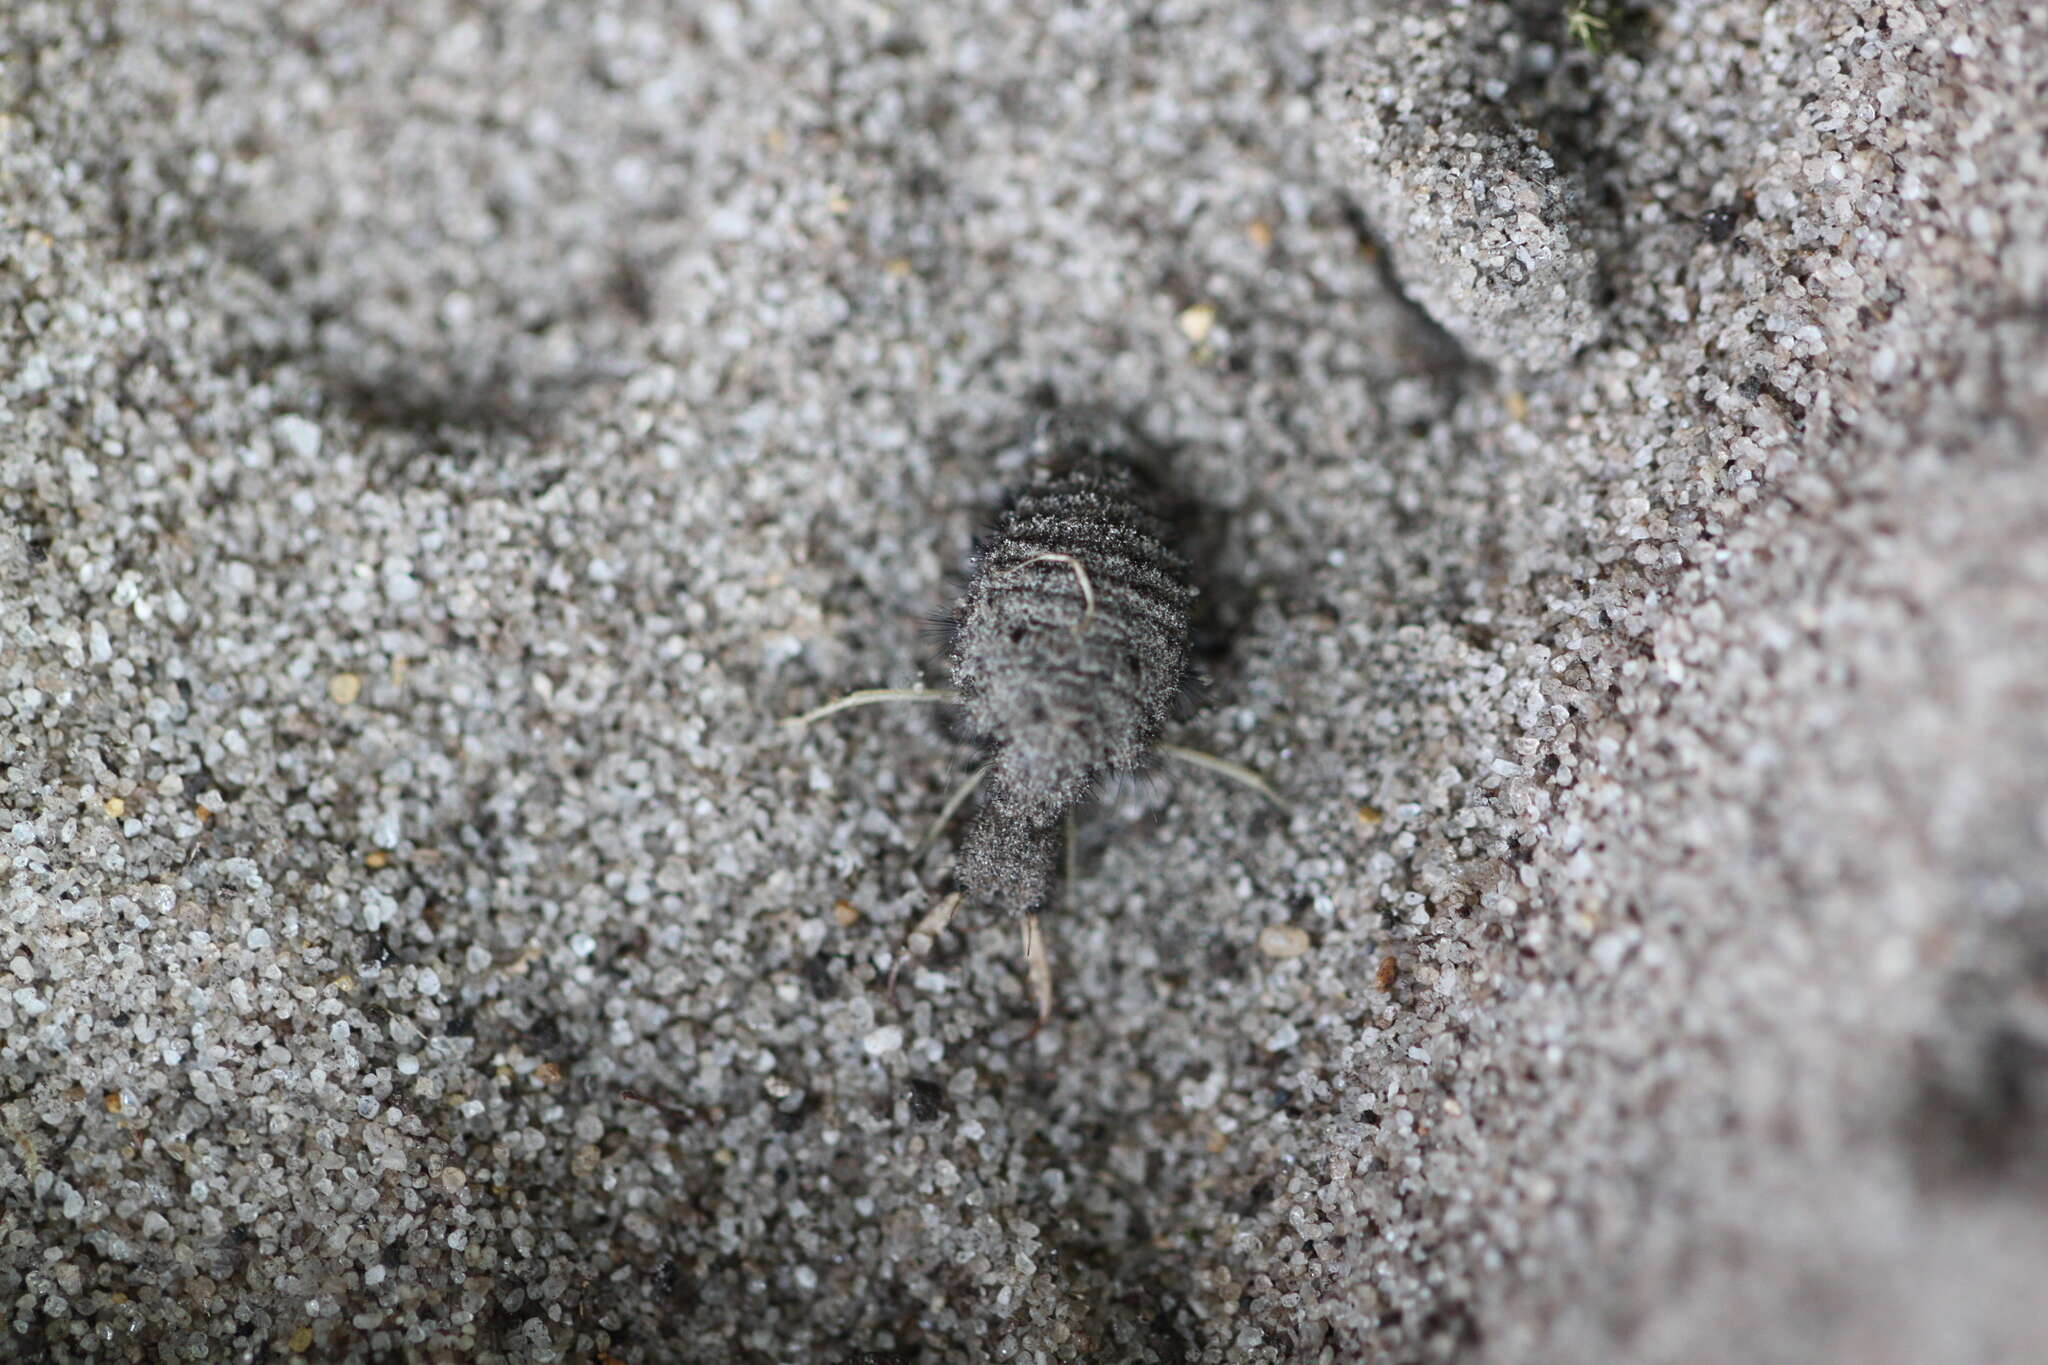 Image of ant-lion